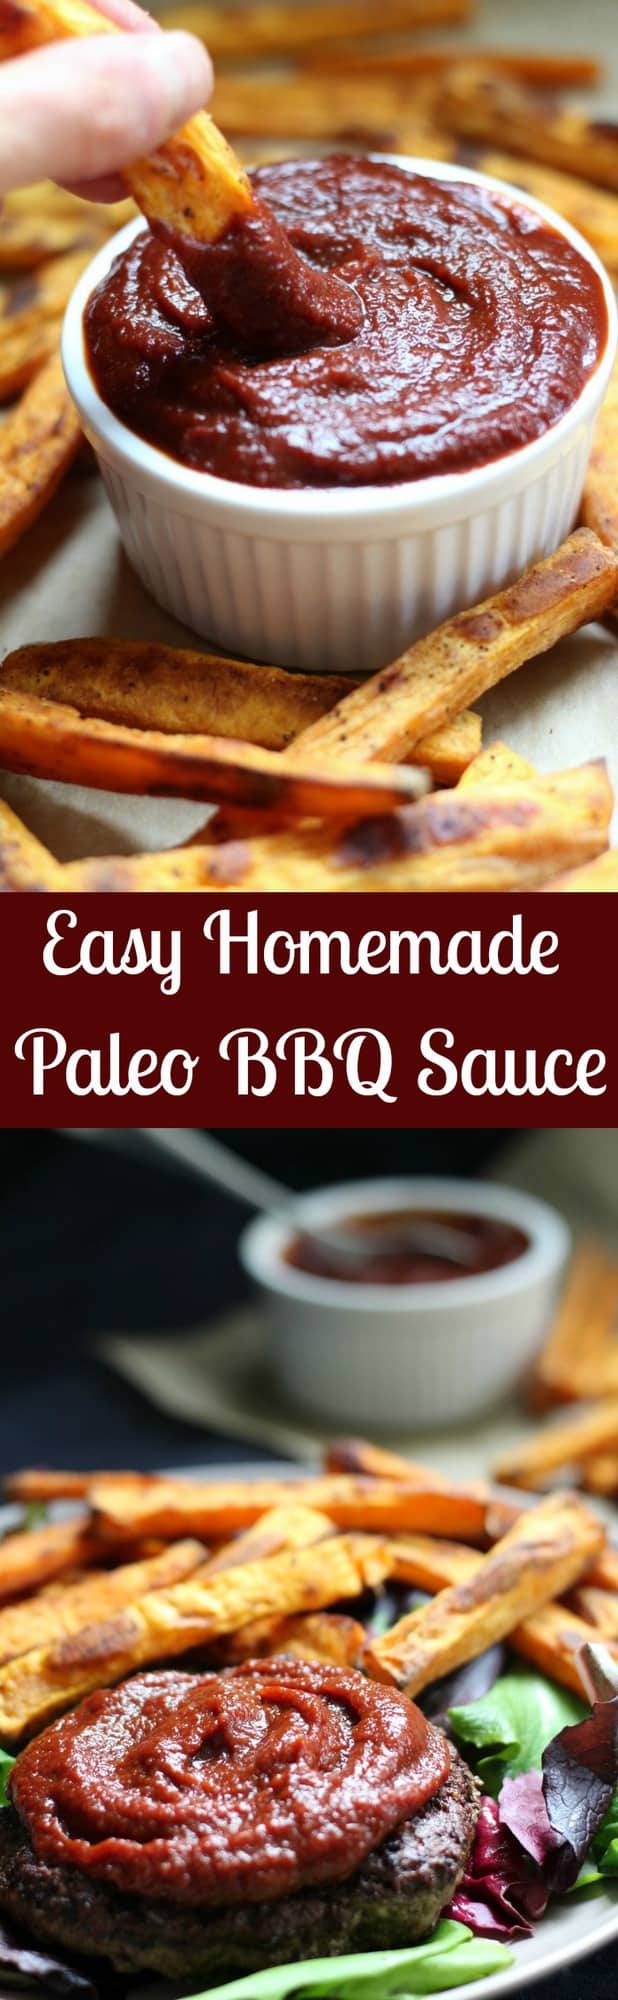 Easy Paleo and Vegan Homemade BBQ Sauce sweetened with tart cherry juice and molasses with perfect smoky flavor